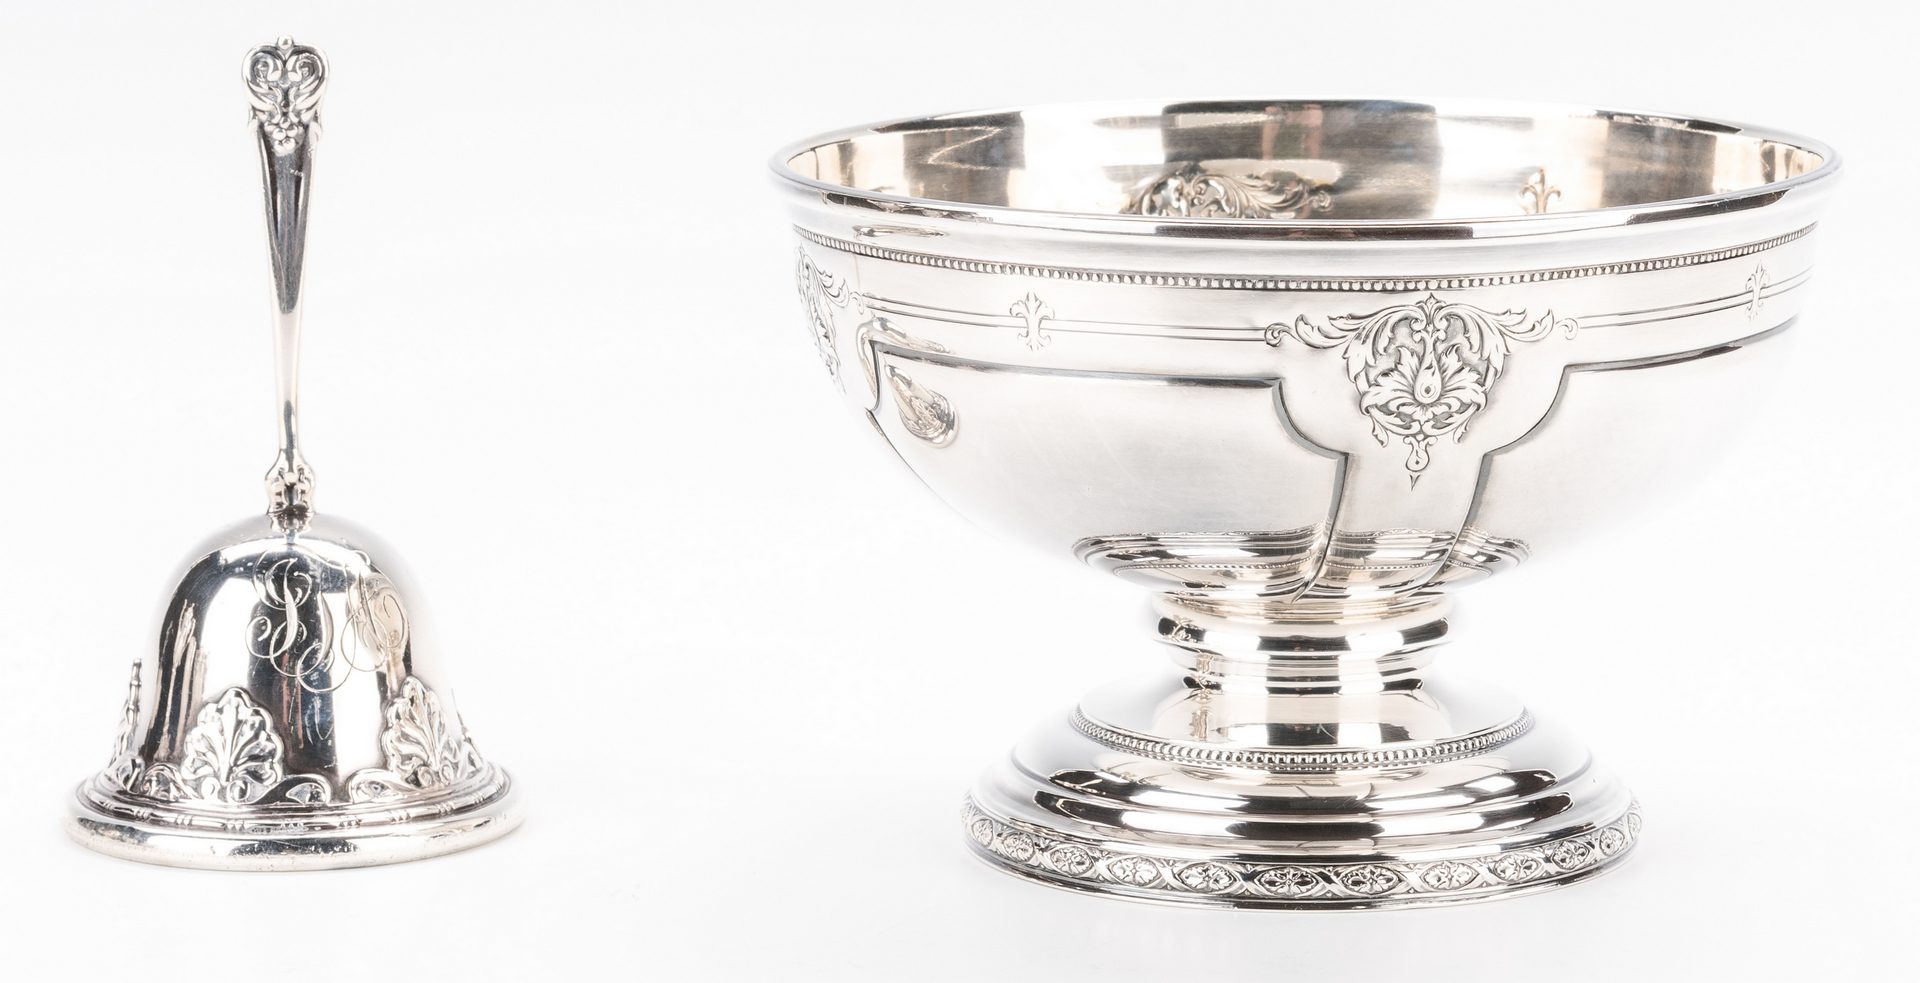 Lot 396: Towle sterling tea set, Royal Windsor, with bell and tray